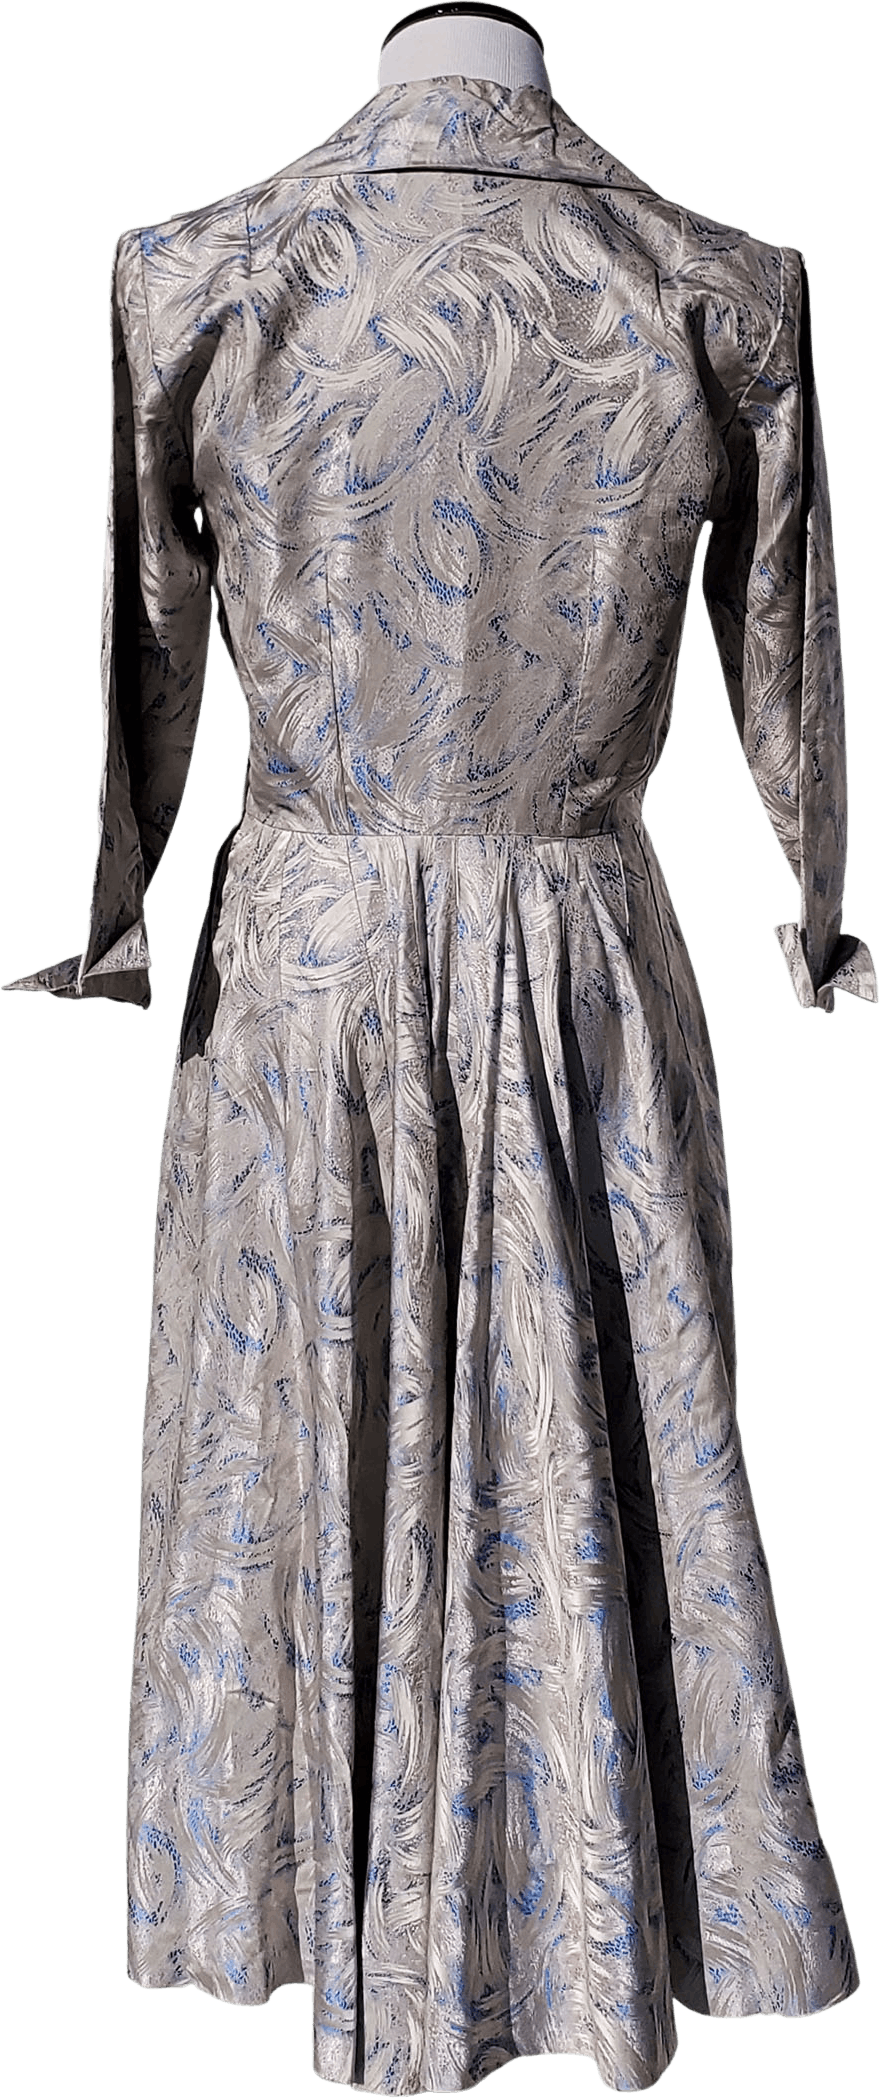 Vintage 50's Silver and Blue Fit and Flare Dress by Mori | Shop THRILLING